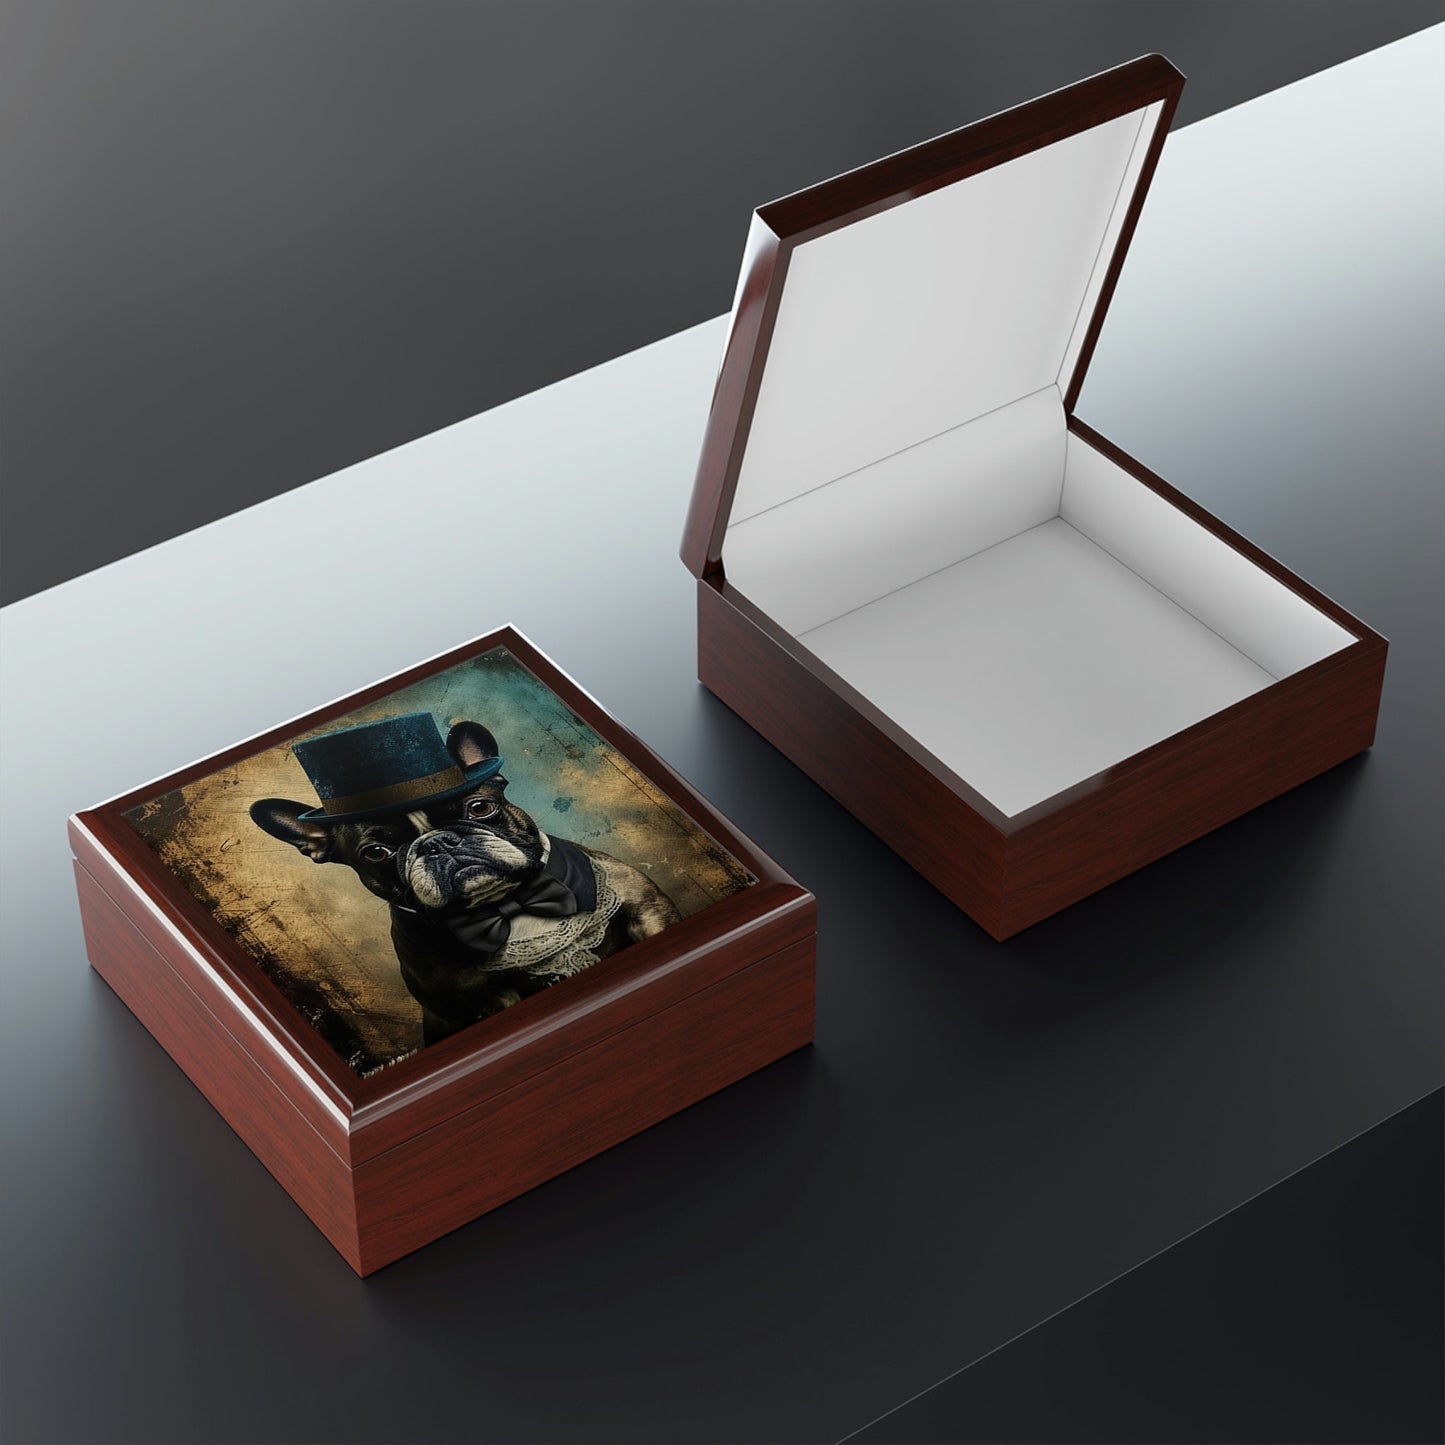 French Bulldog Portrait Jewelry Keepsake Box - a perfect gift for the frenchy lover or any bull dog fan